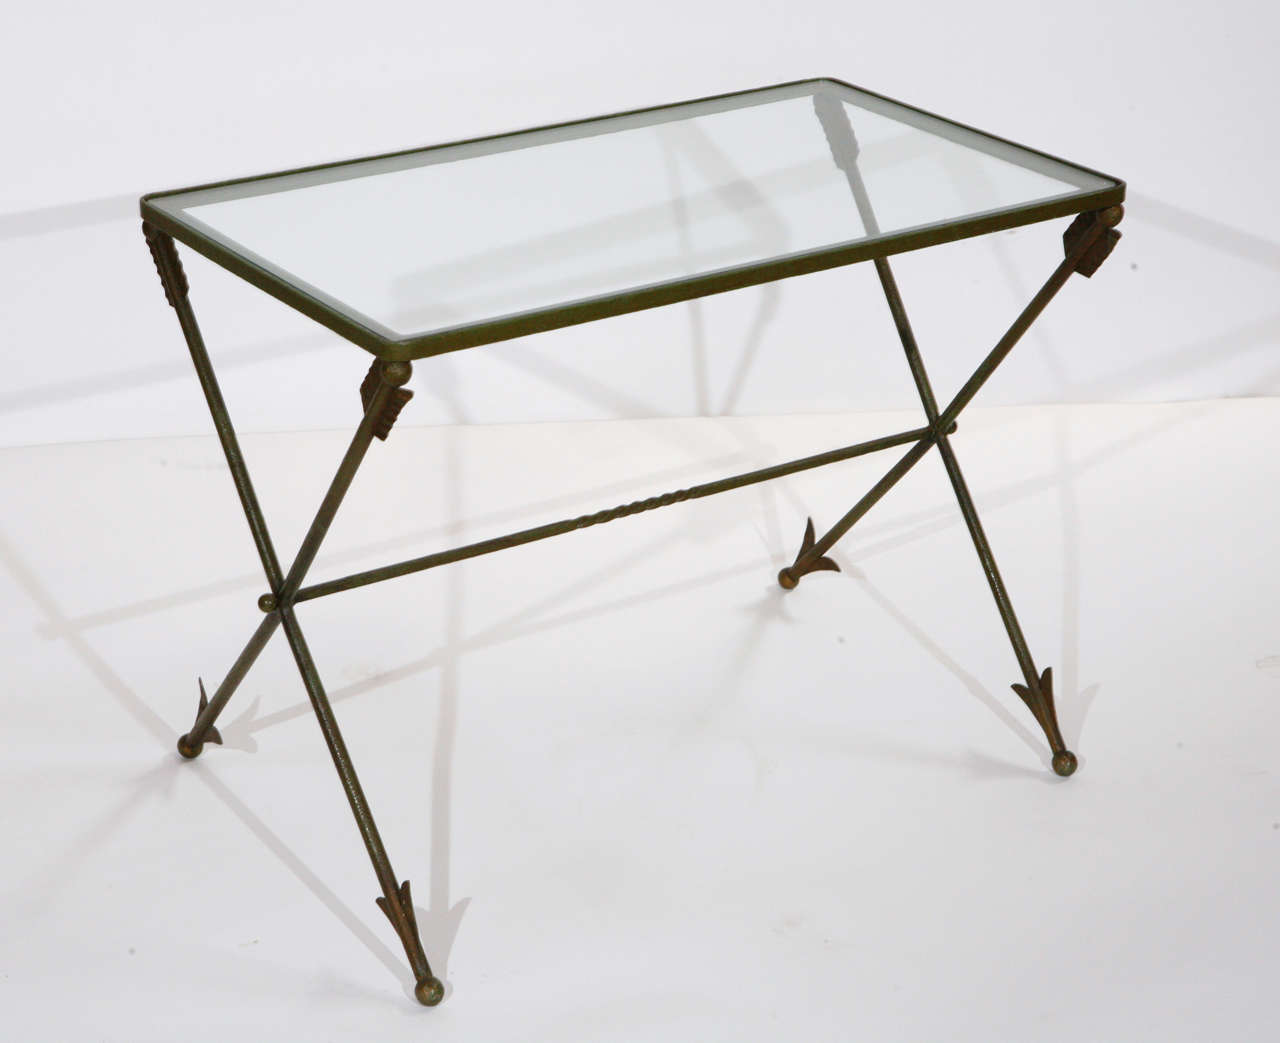 A vintage Italian green patinated metal arrows table so popular during the Hollywood Regency period. It has a X base design and has a new glass top. This table was purchased in Holland in the 1970s but most likely is Italian made. This would make a